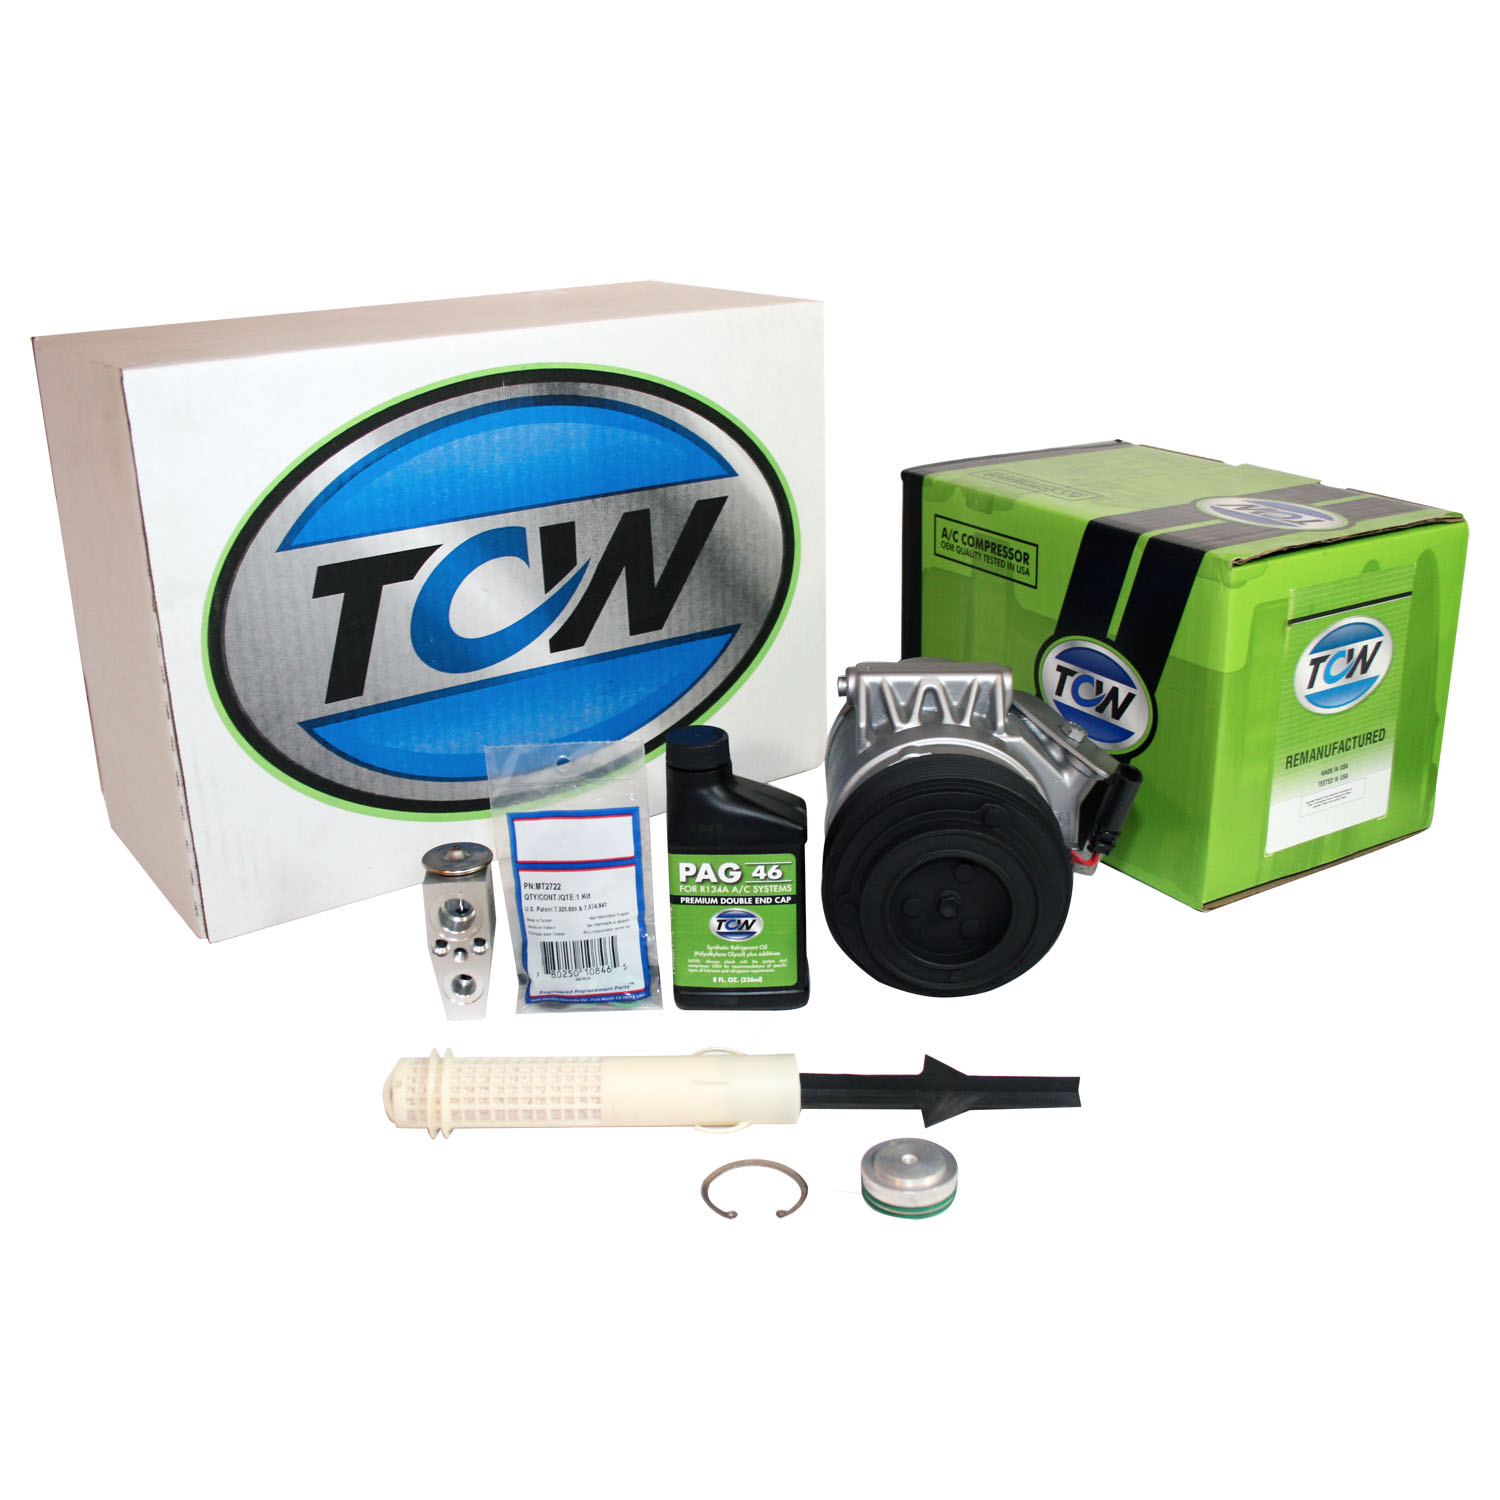 TCW Vehicle A/C Kit K1000463R Remanufactured Product Image field_60b6a13a6e67c